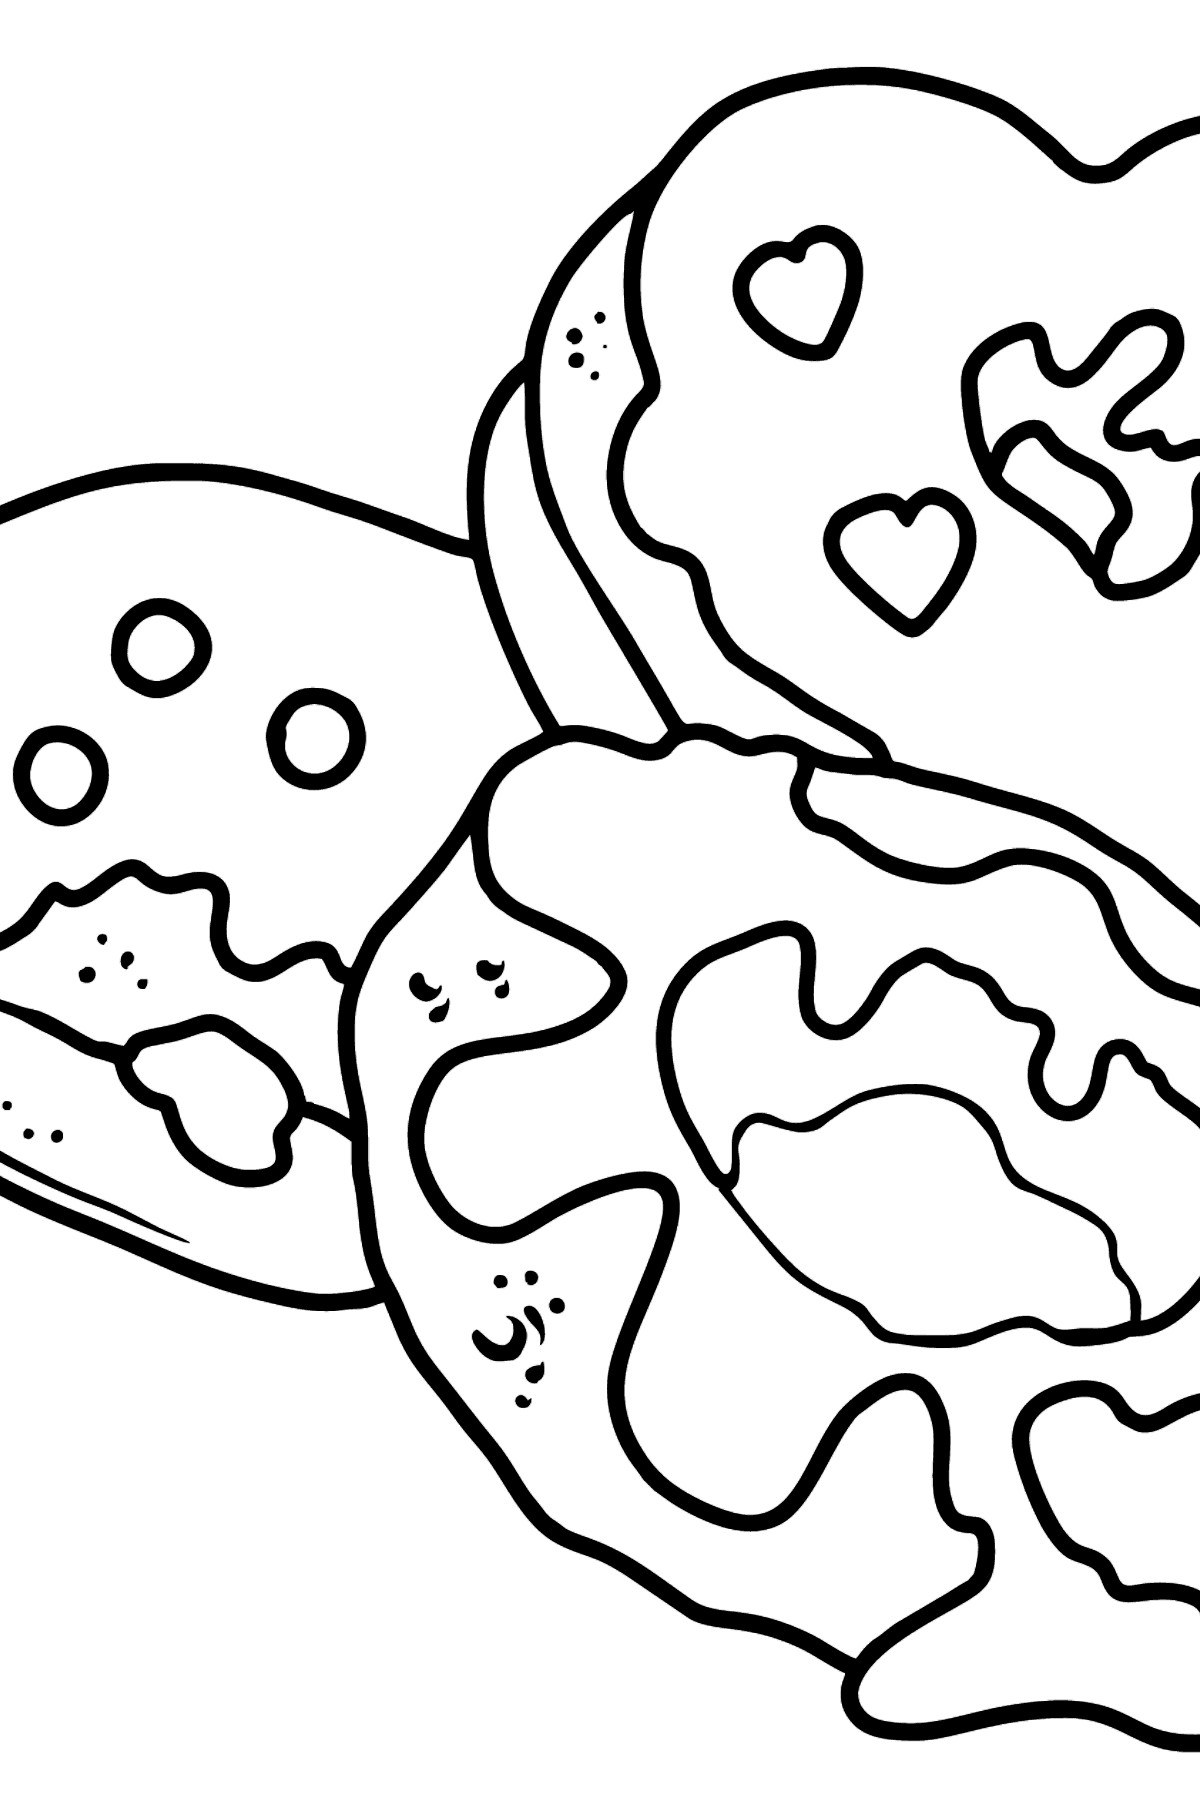 Different Shaped Donuts coloring page - Coloring Pages for Kids